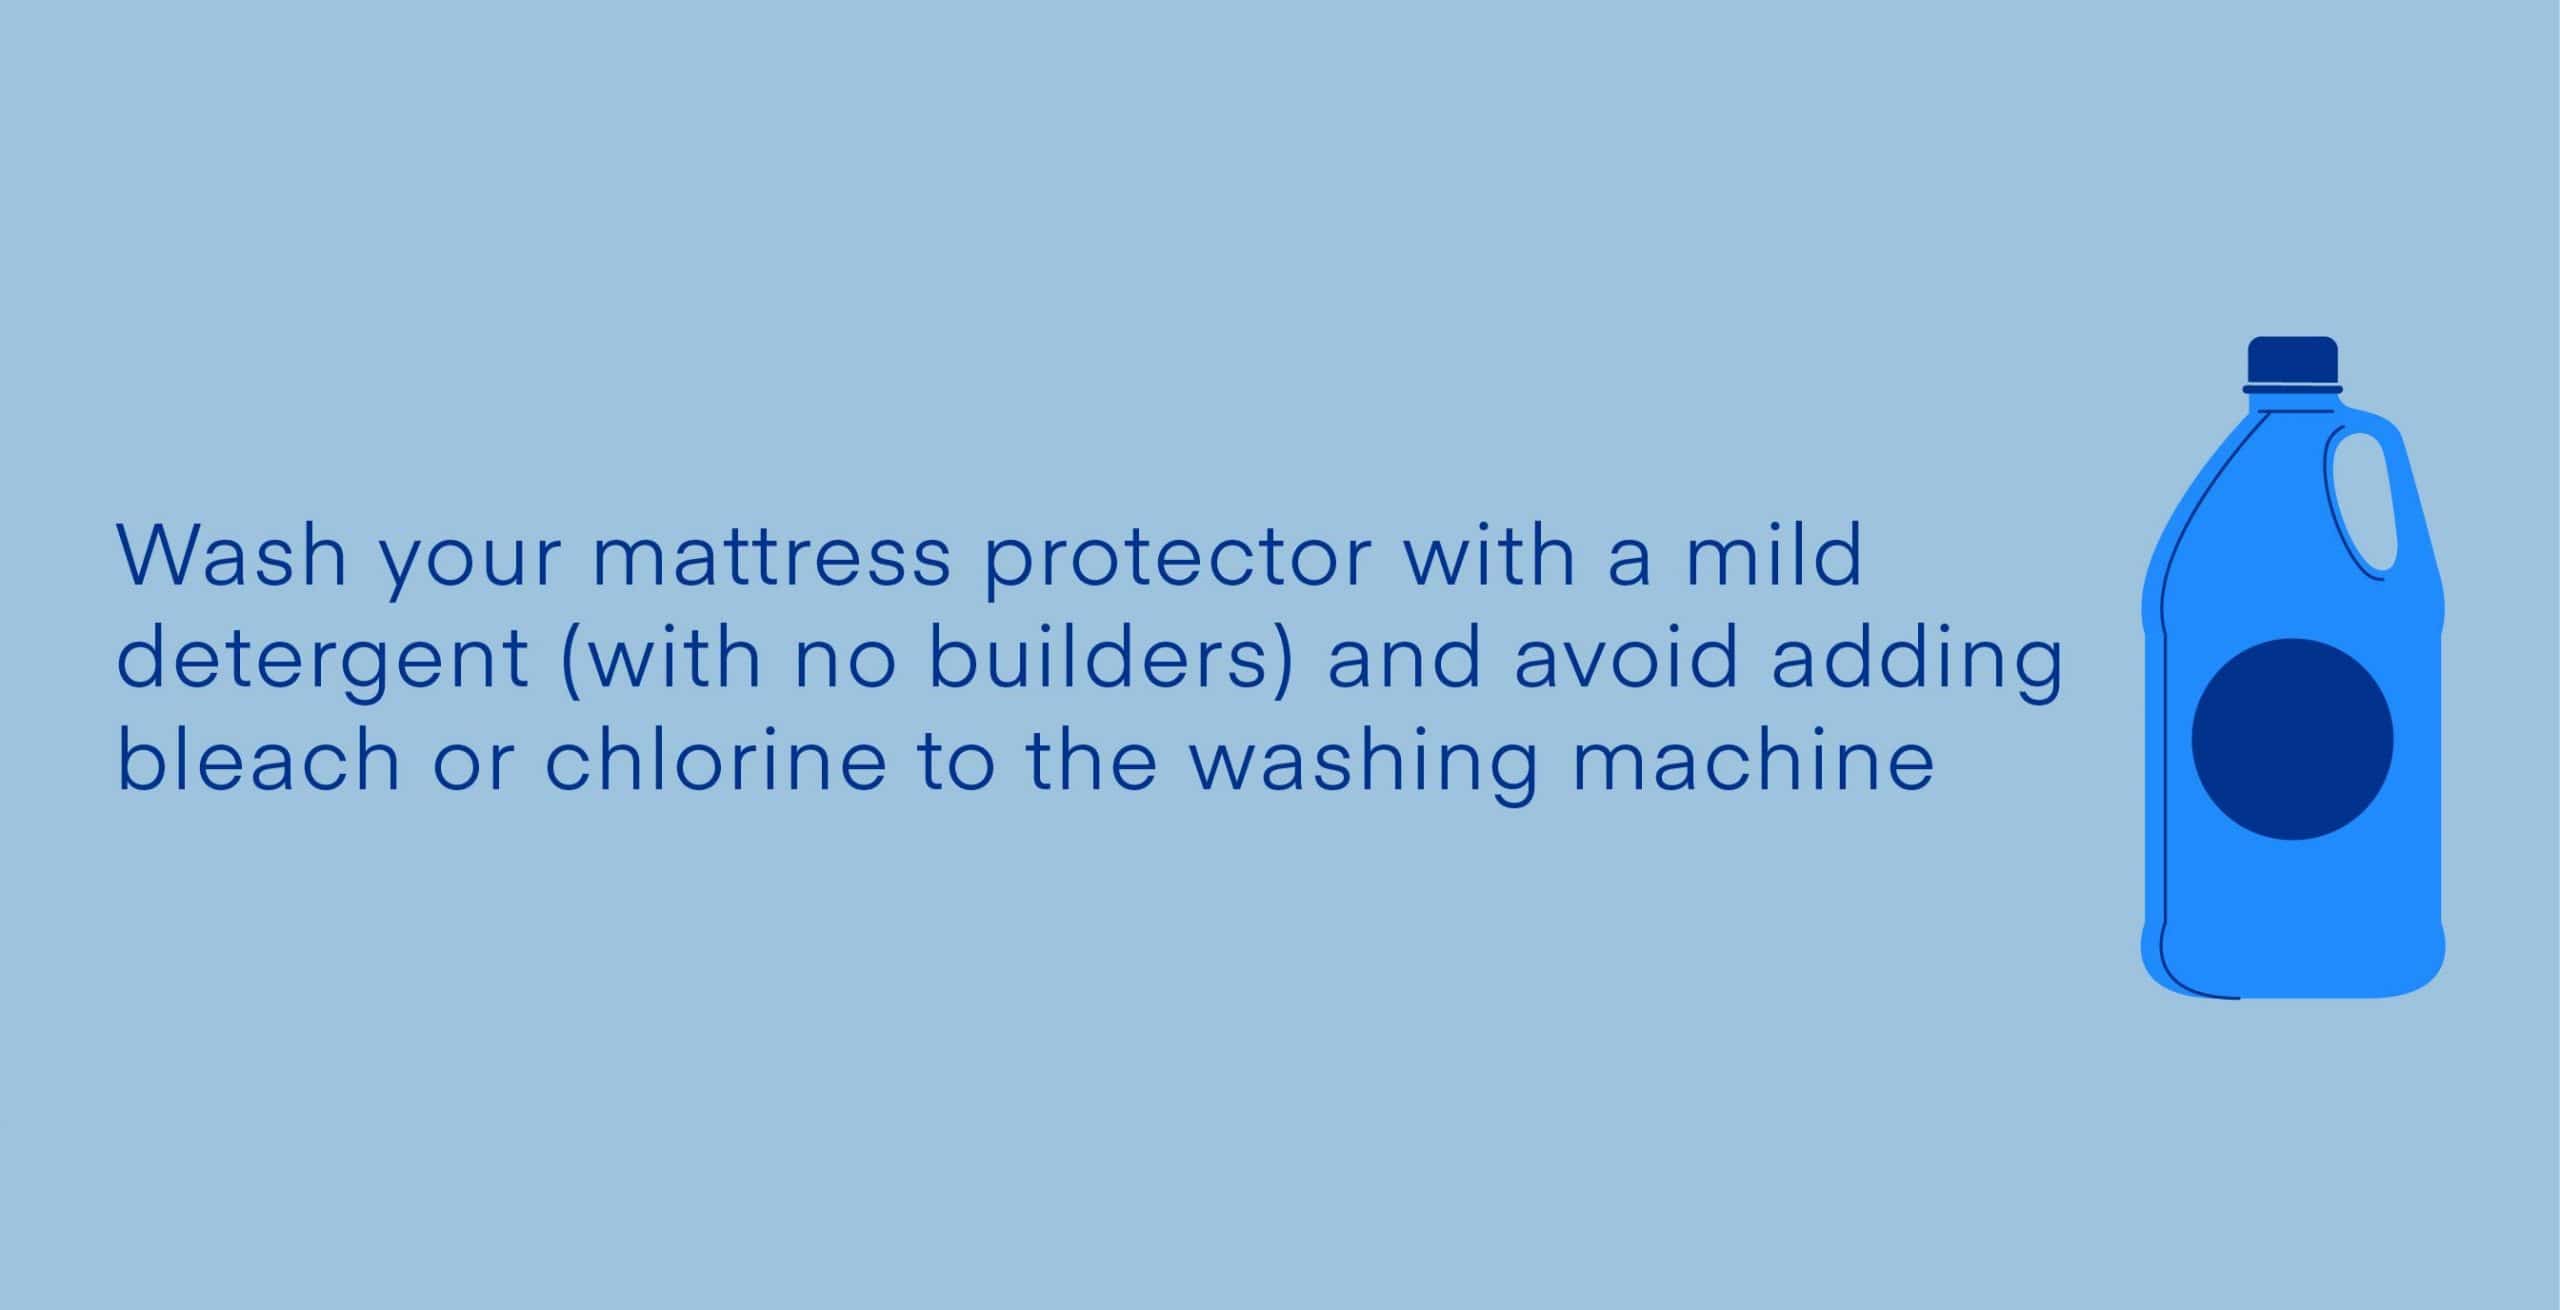 How Often Should You Wash A Mattress Protector?